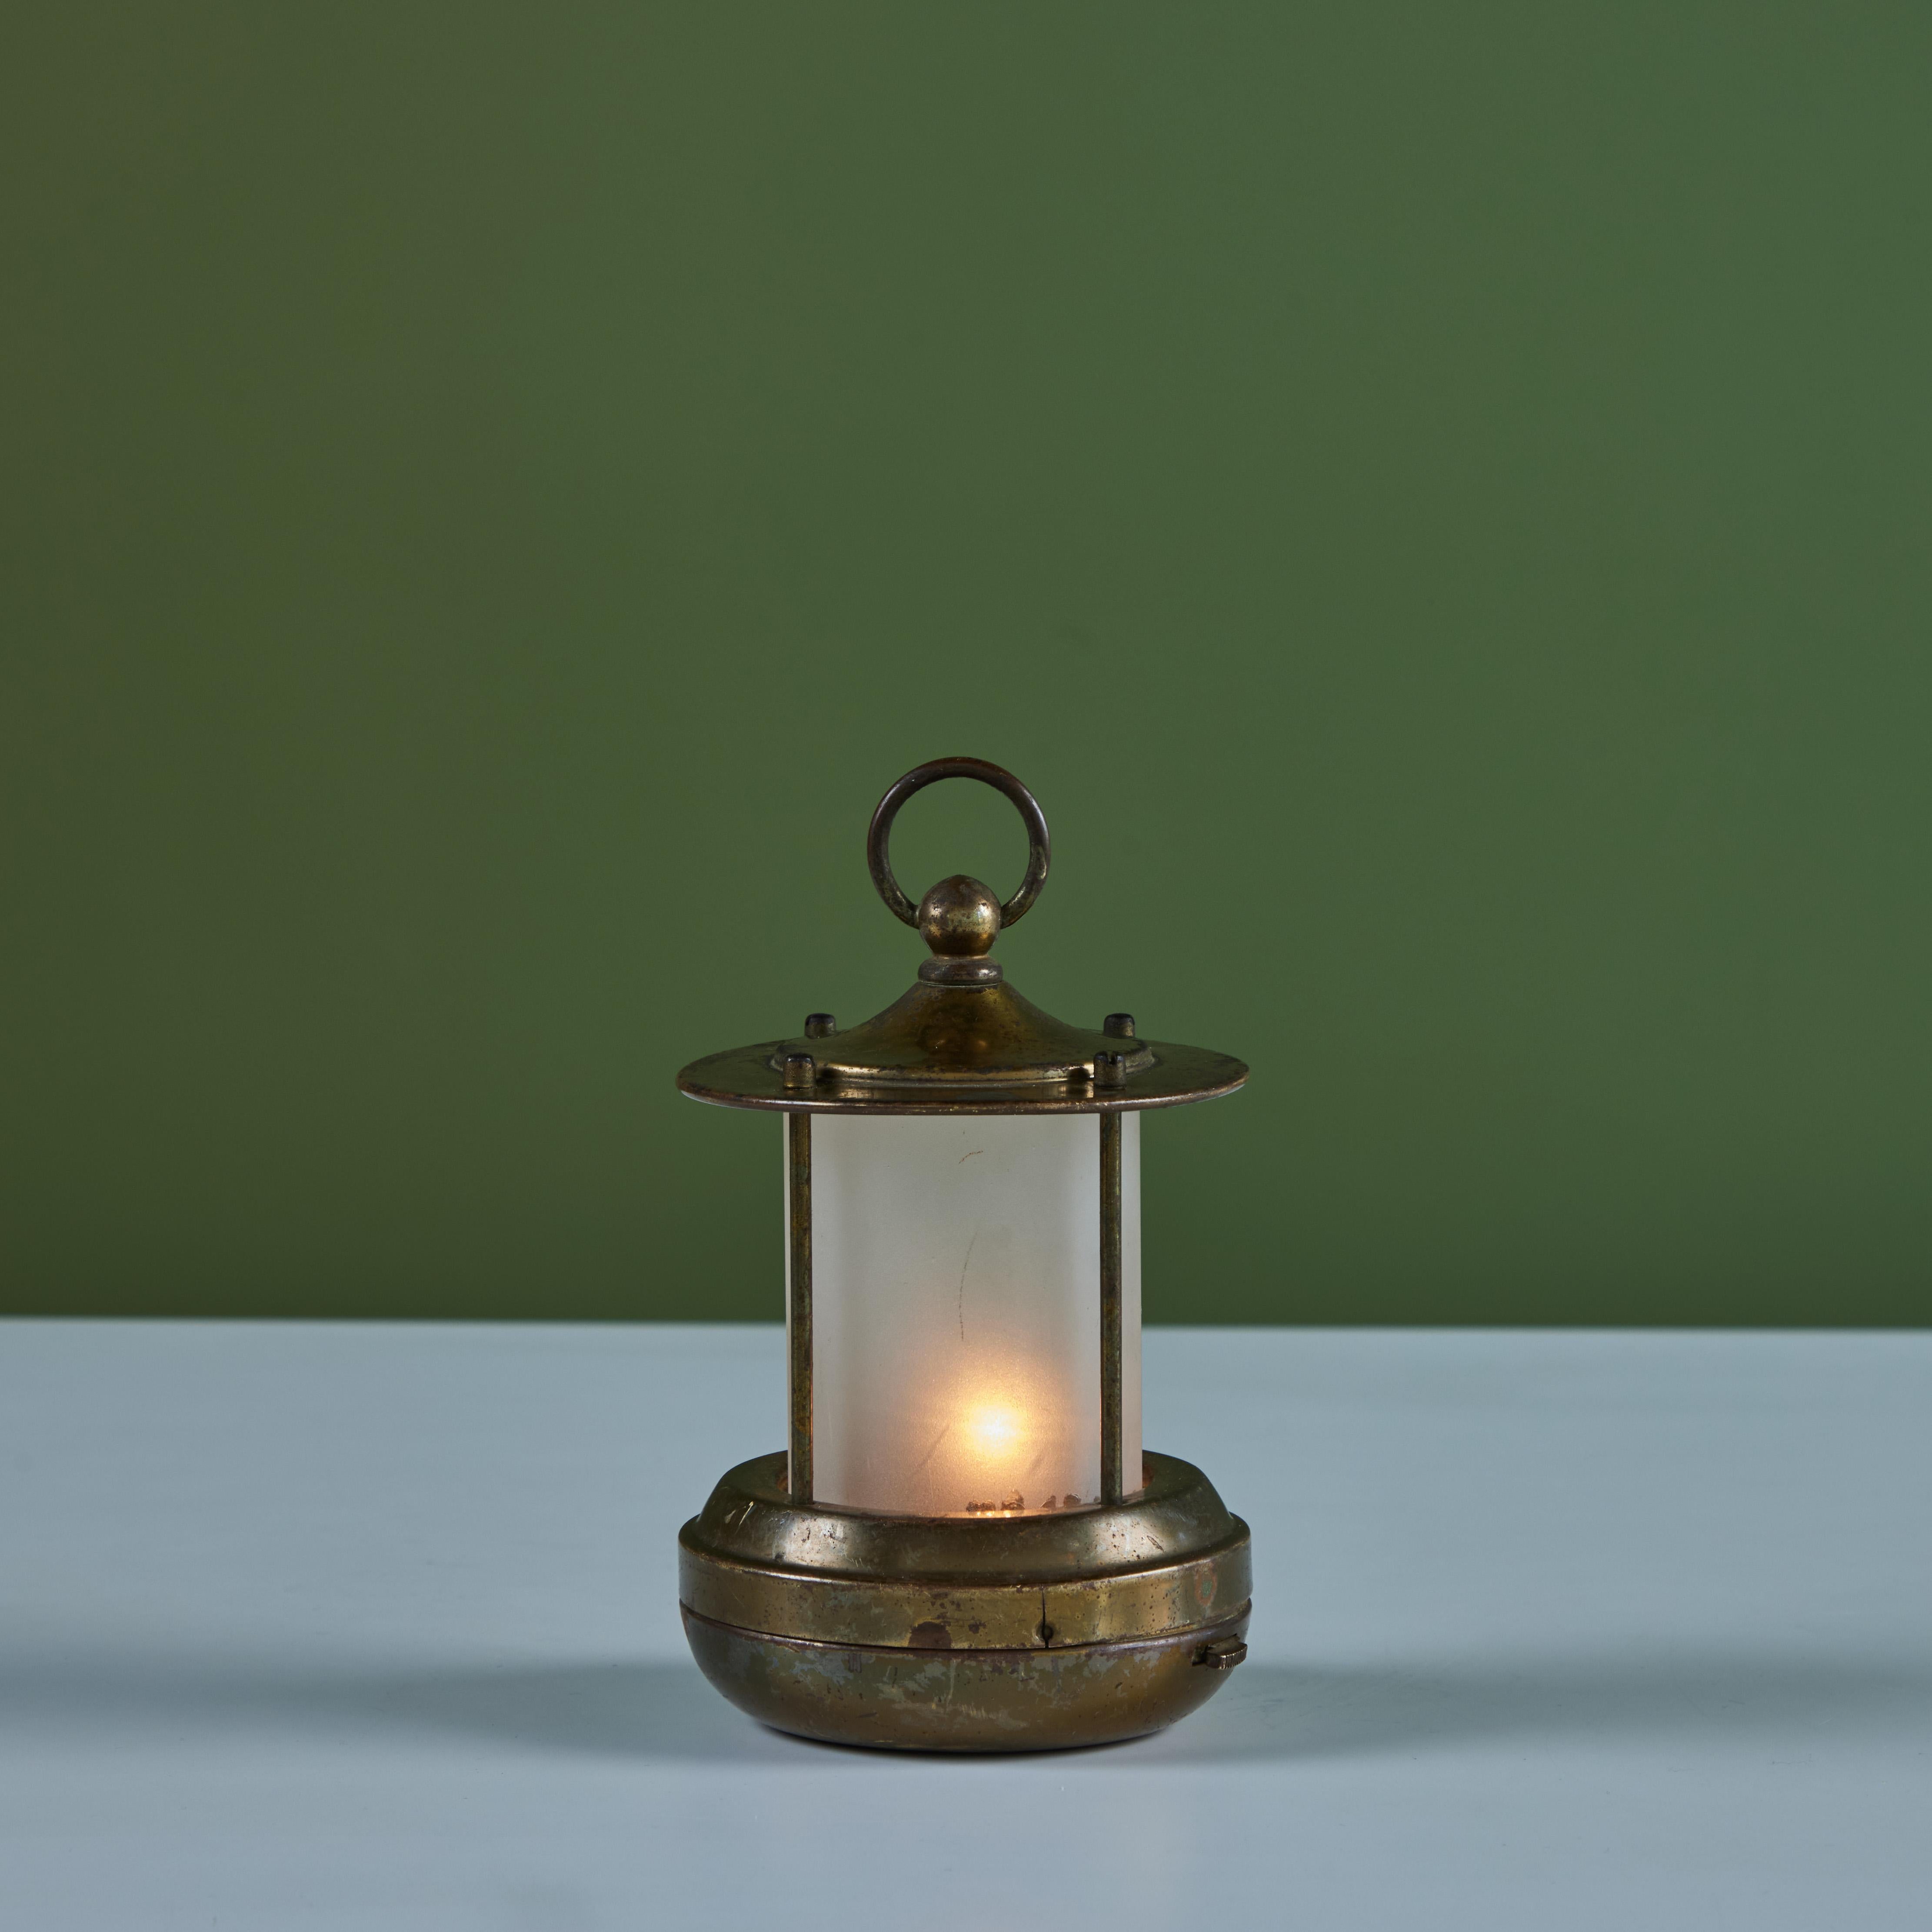 Petite brass lantern style table lamp for Chase, c.1930s, USA. The Art Deco lamp features a cylindrical cone shaped glass with a brass base and cap with handle. This particular lamp is battery powered with two C batteries so it can be placed